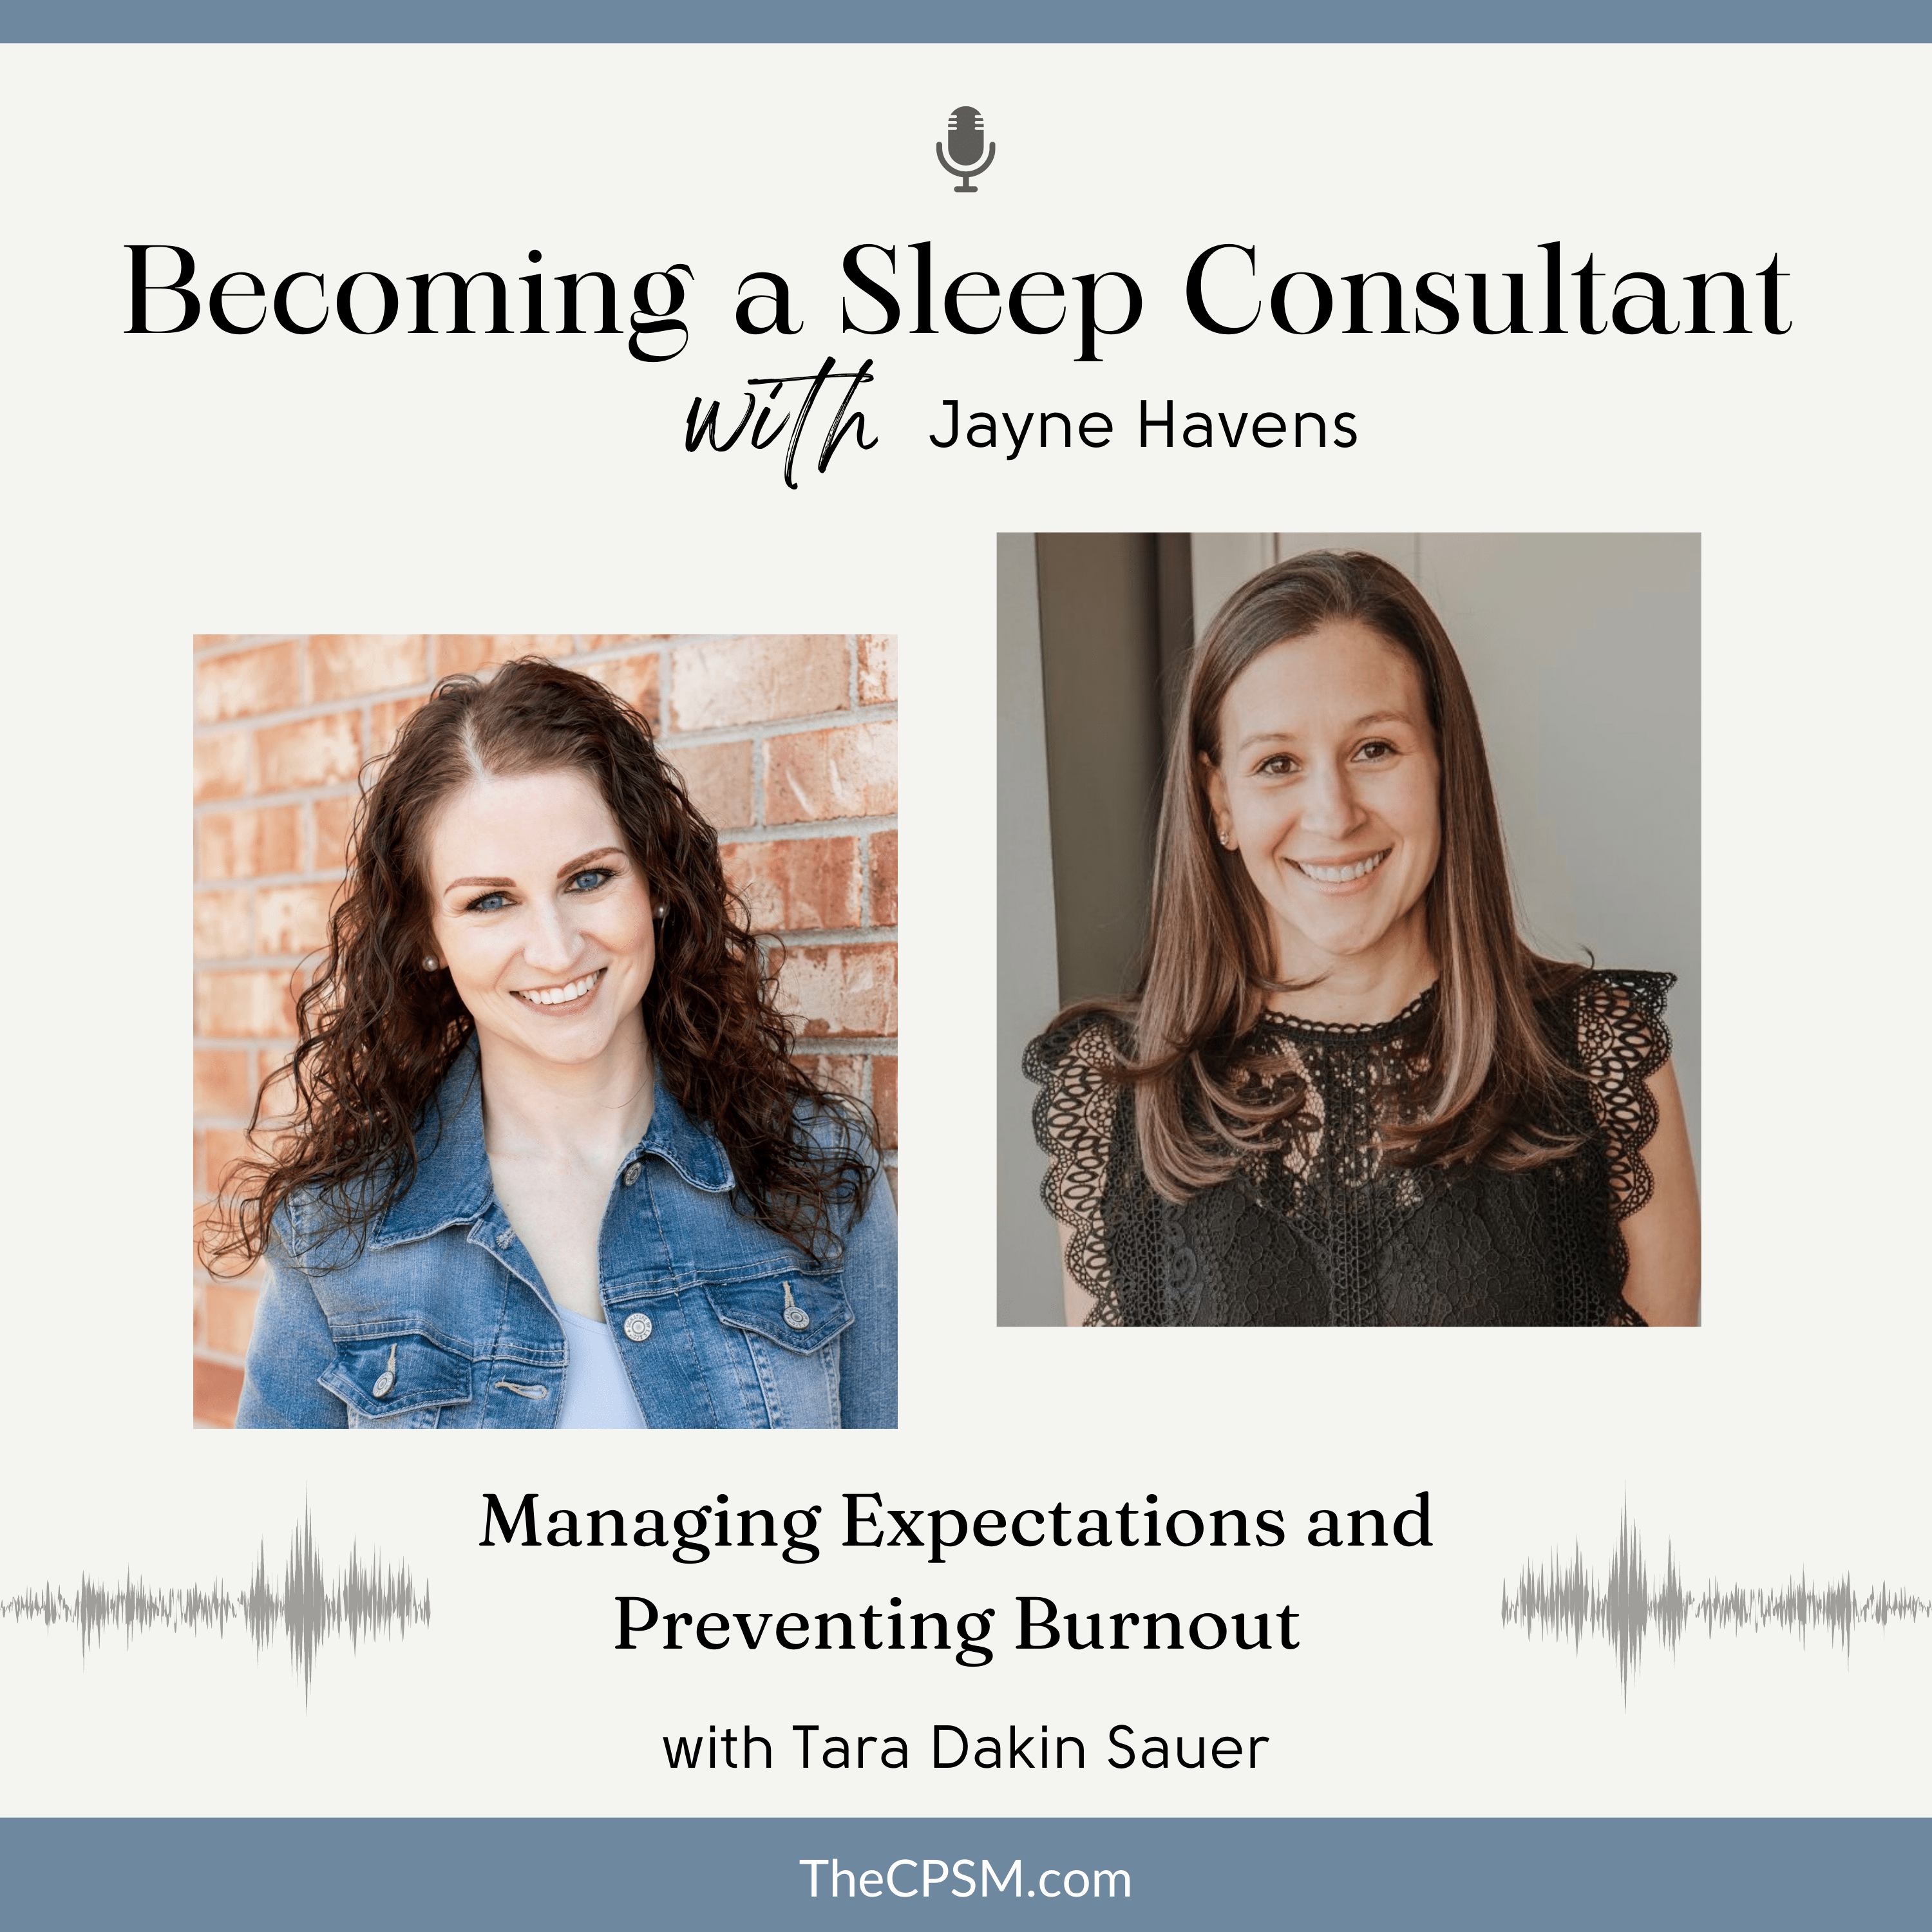 Managing Expectations and Preventing Burnout with Tara Dakin Sauer